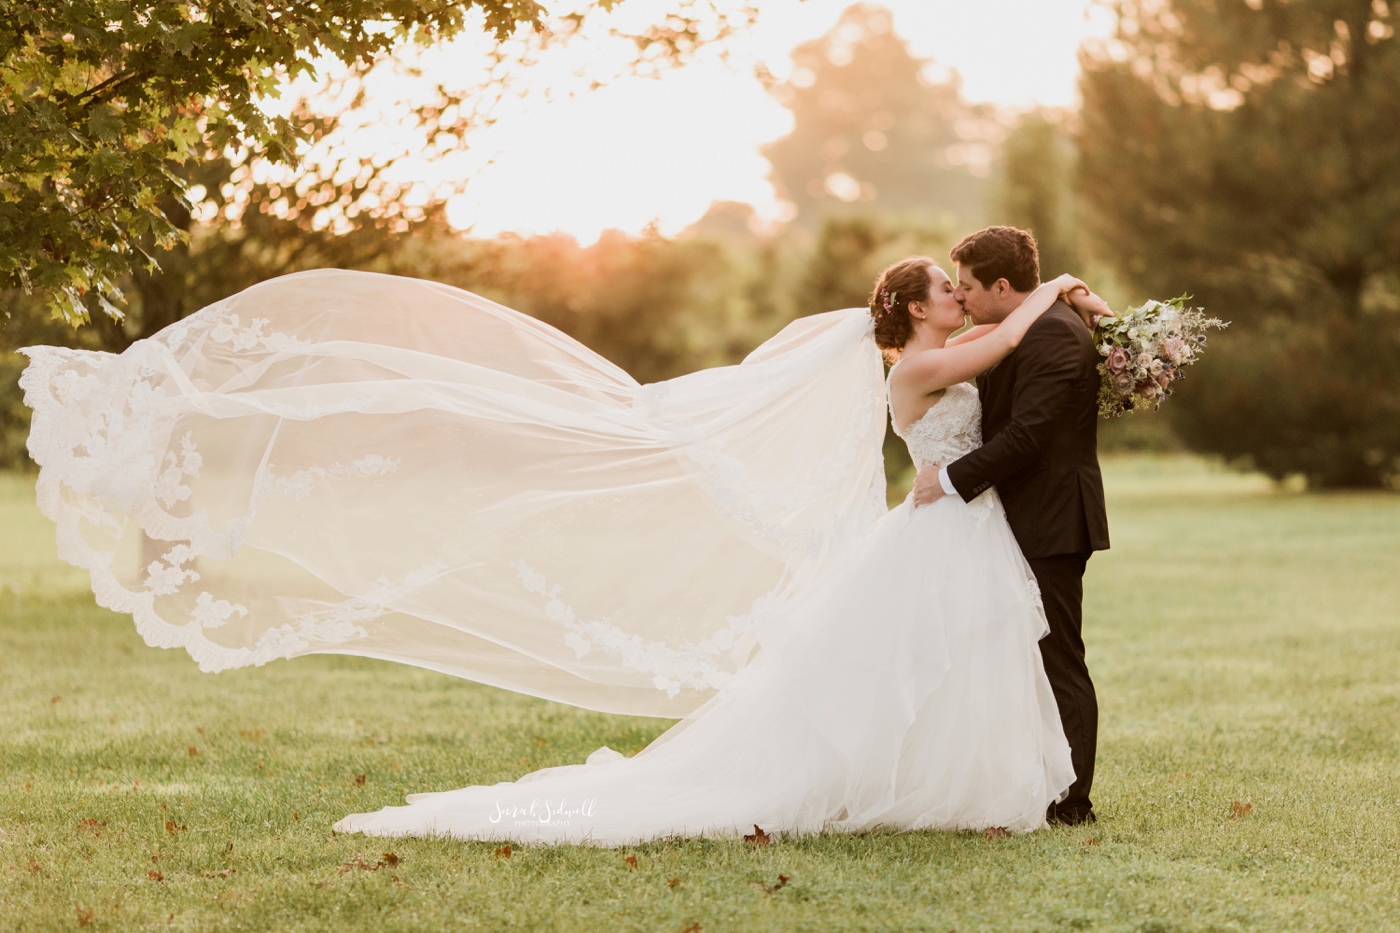 A bride's veil blows in the wind as she kisses her groom. 